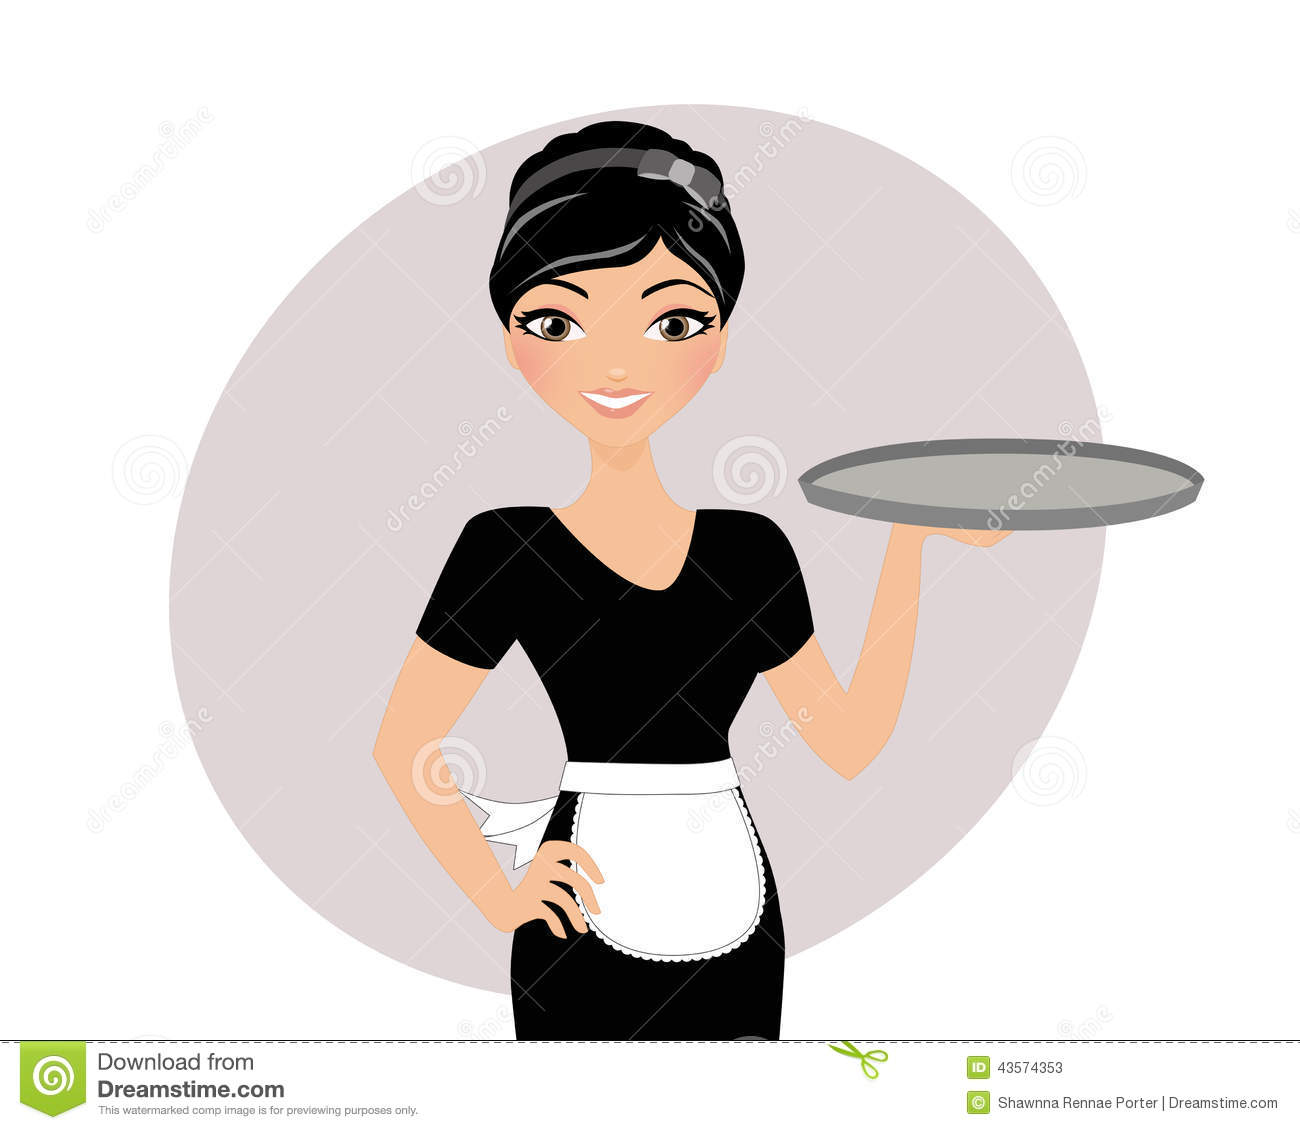 Catering Waitress In Black Dress And White Frill Apron Holding Empty